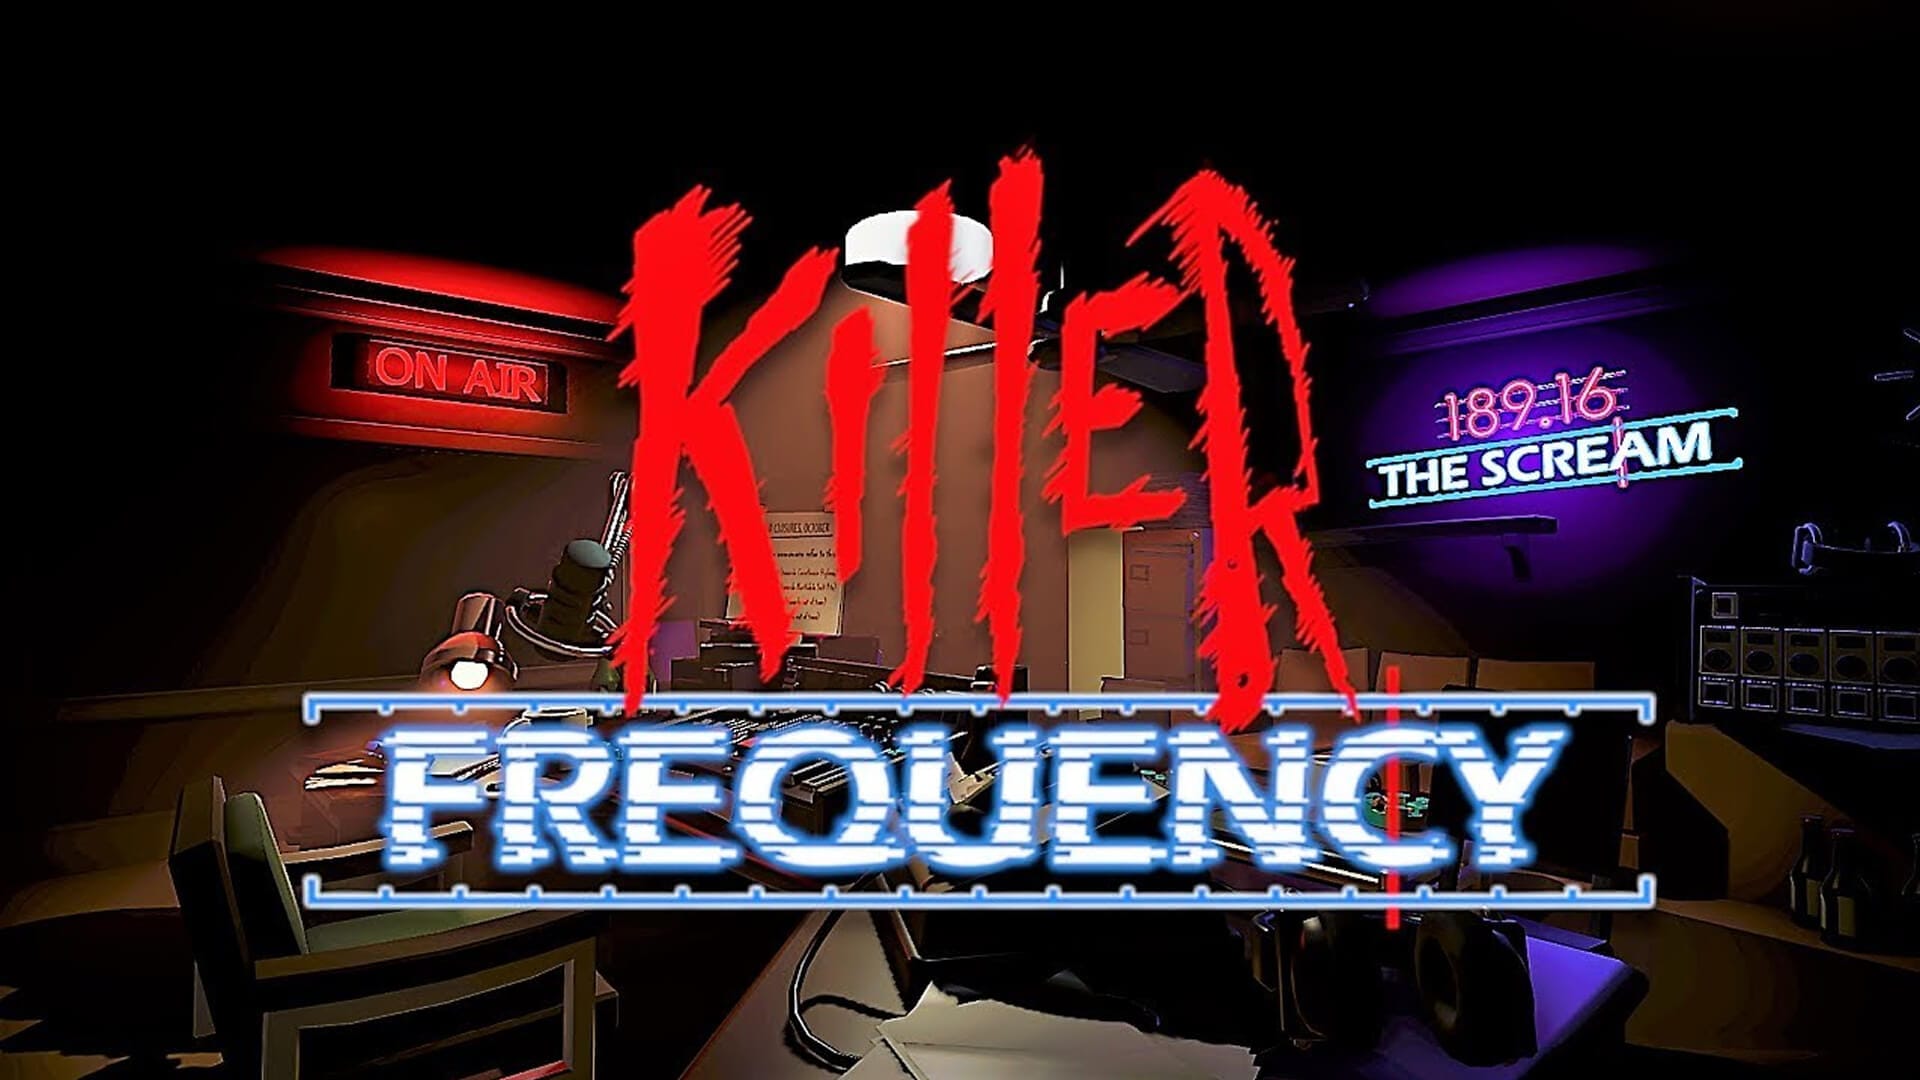 Killer frequency. Killer Frequency игра. Killer Frequency Свистун. Killer Frequency карта. Killer Frequency 2023.